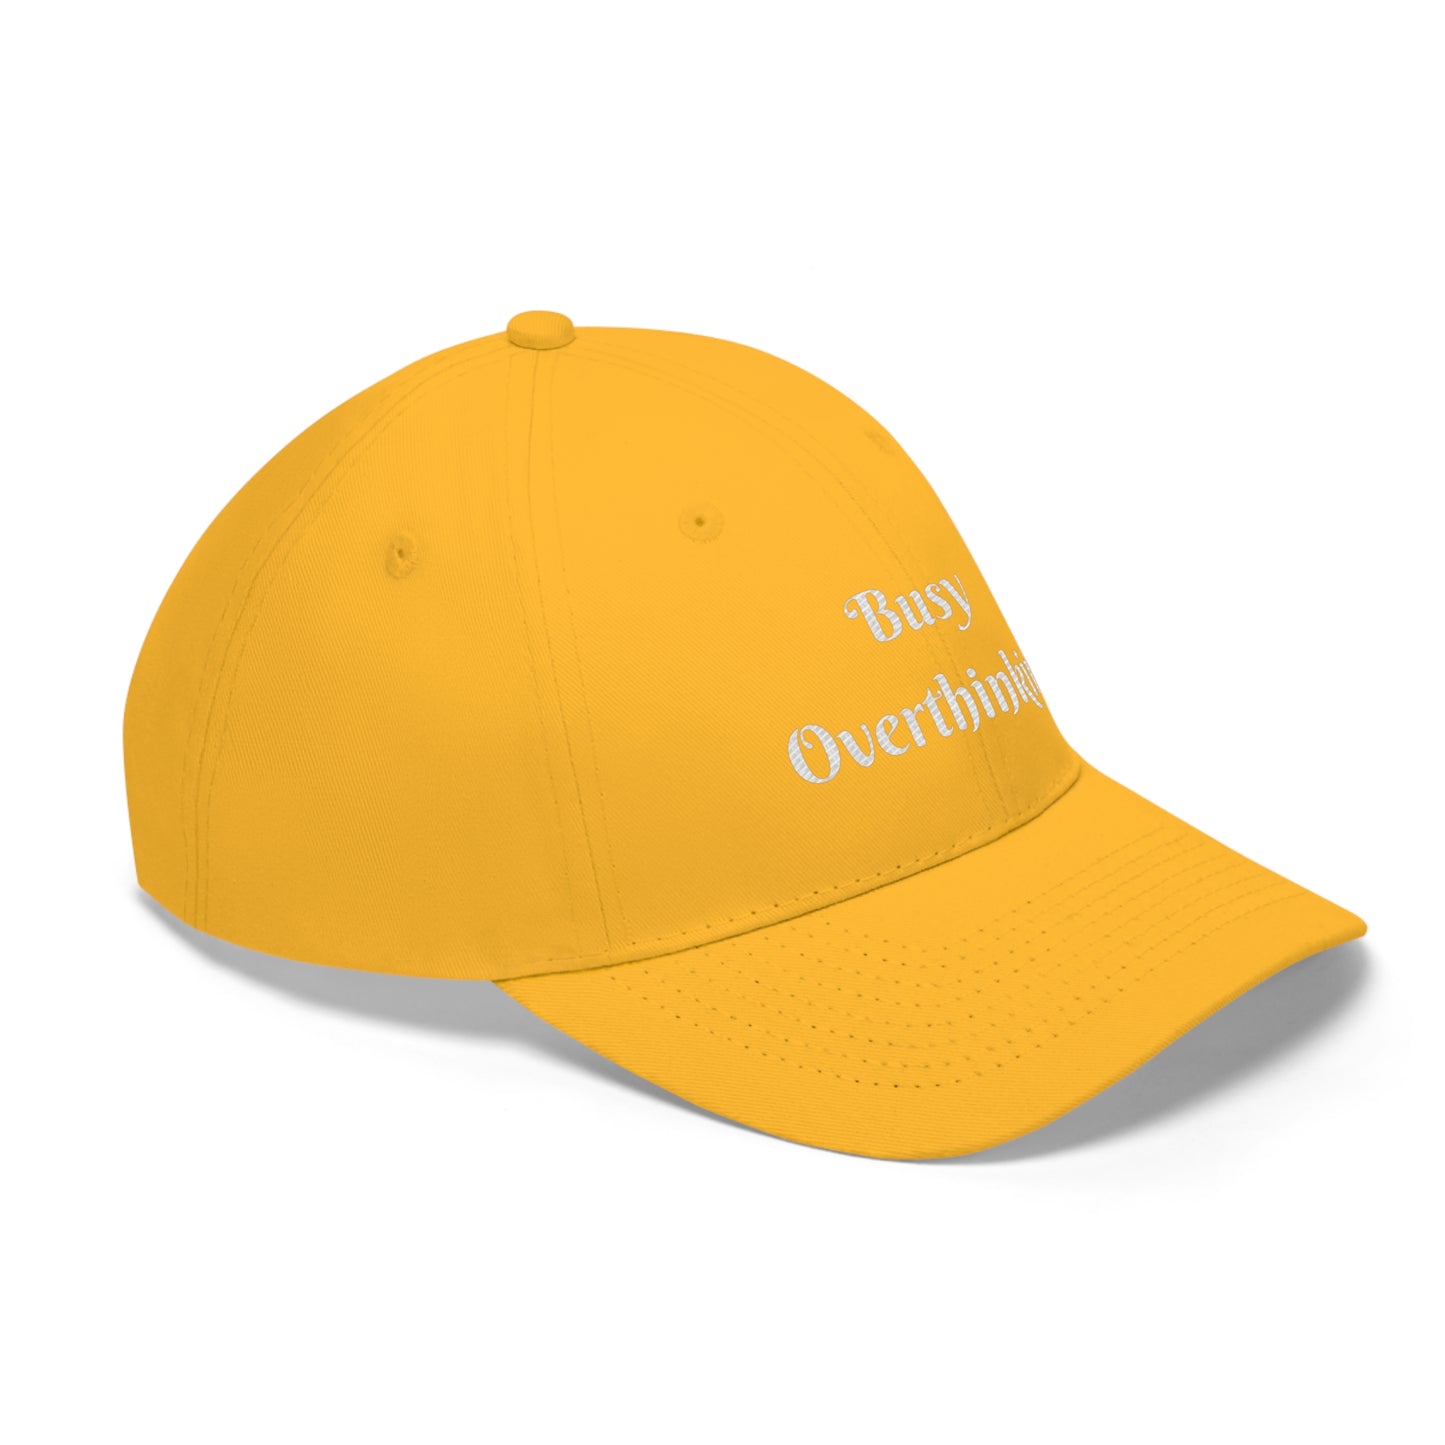 Busy Overthinking Embroidered Hat for Overthinkers